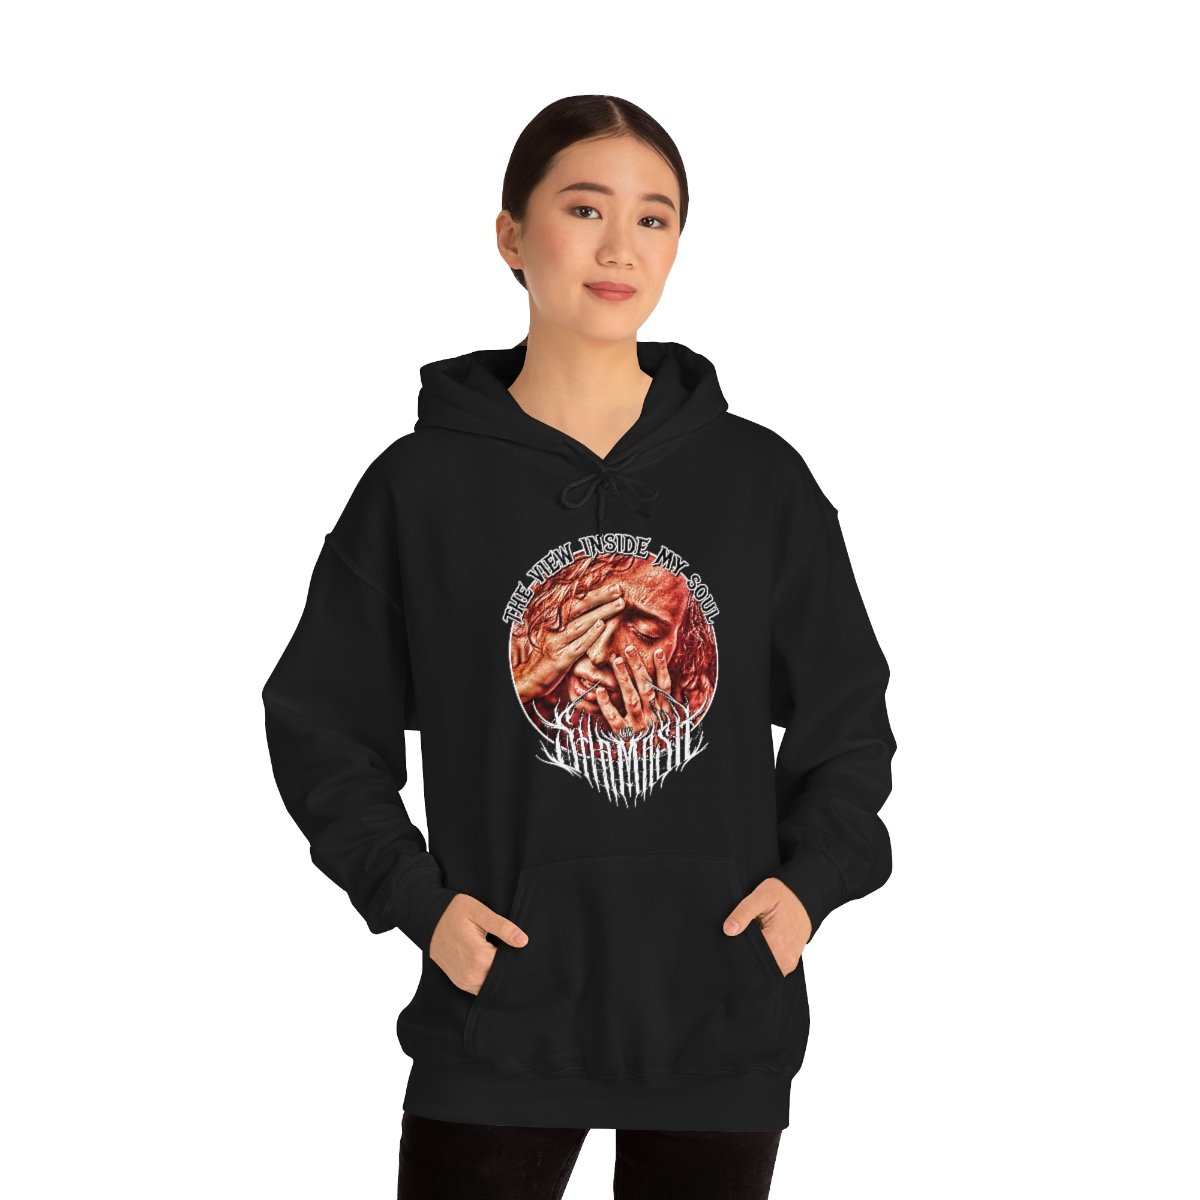 Shamash – The View Inside My Mind Pullover Hooded Sweatshirt